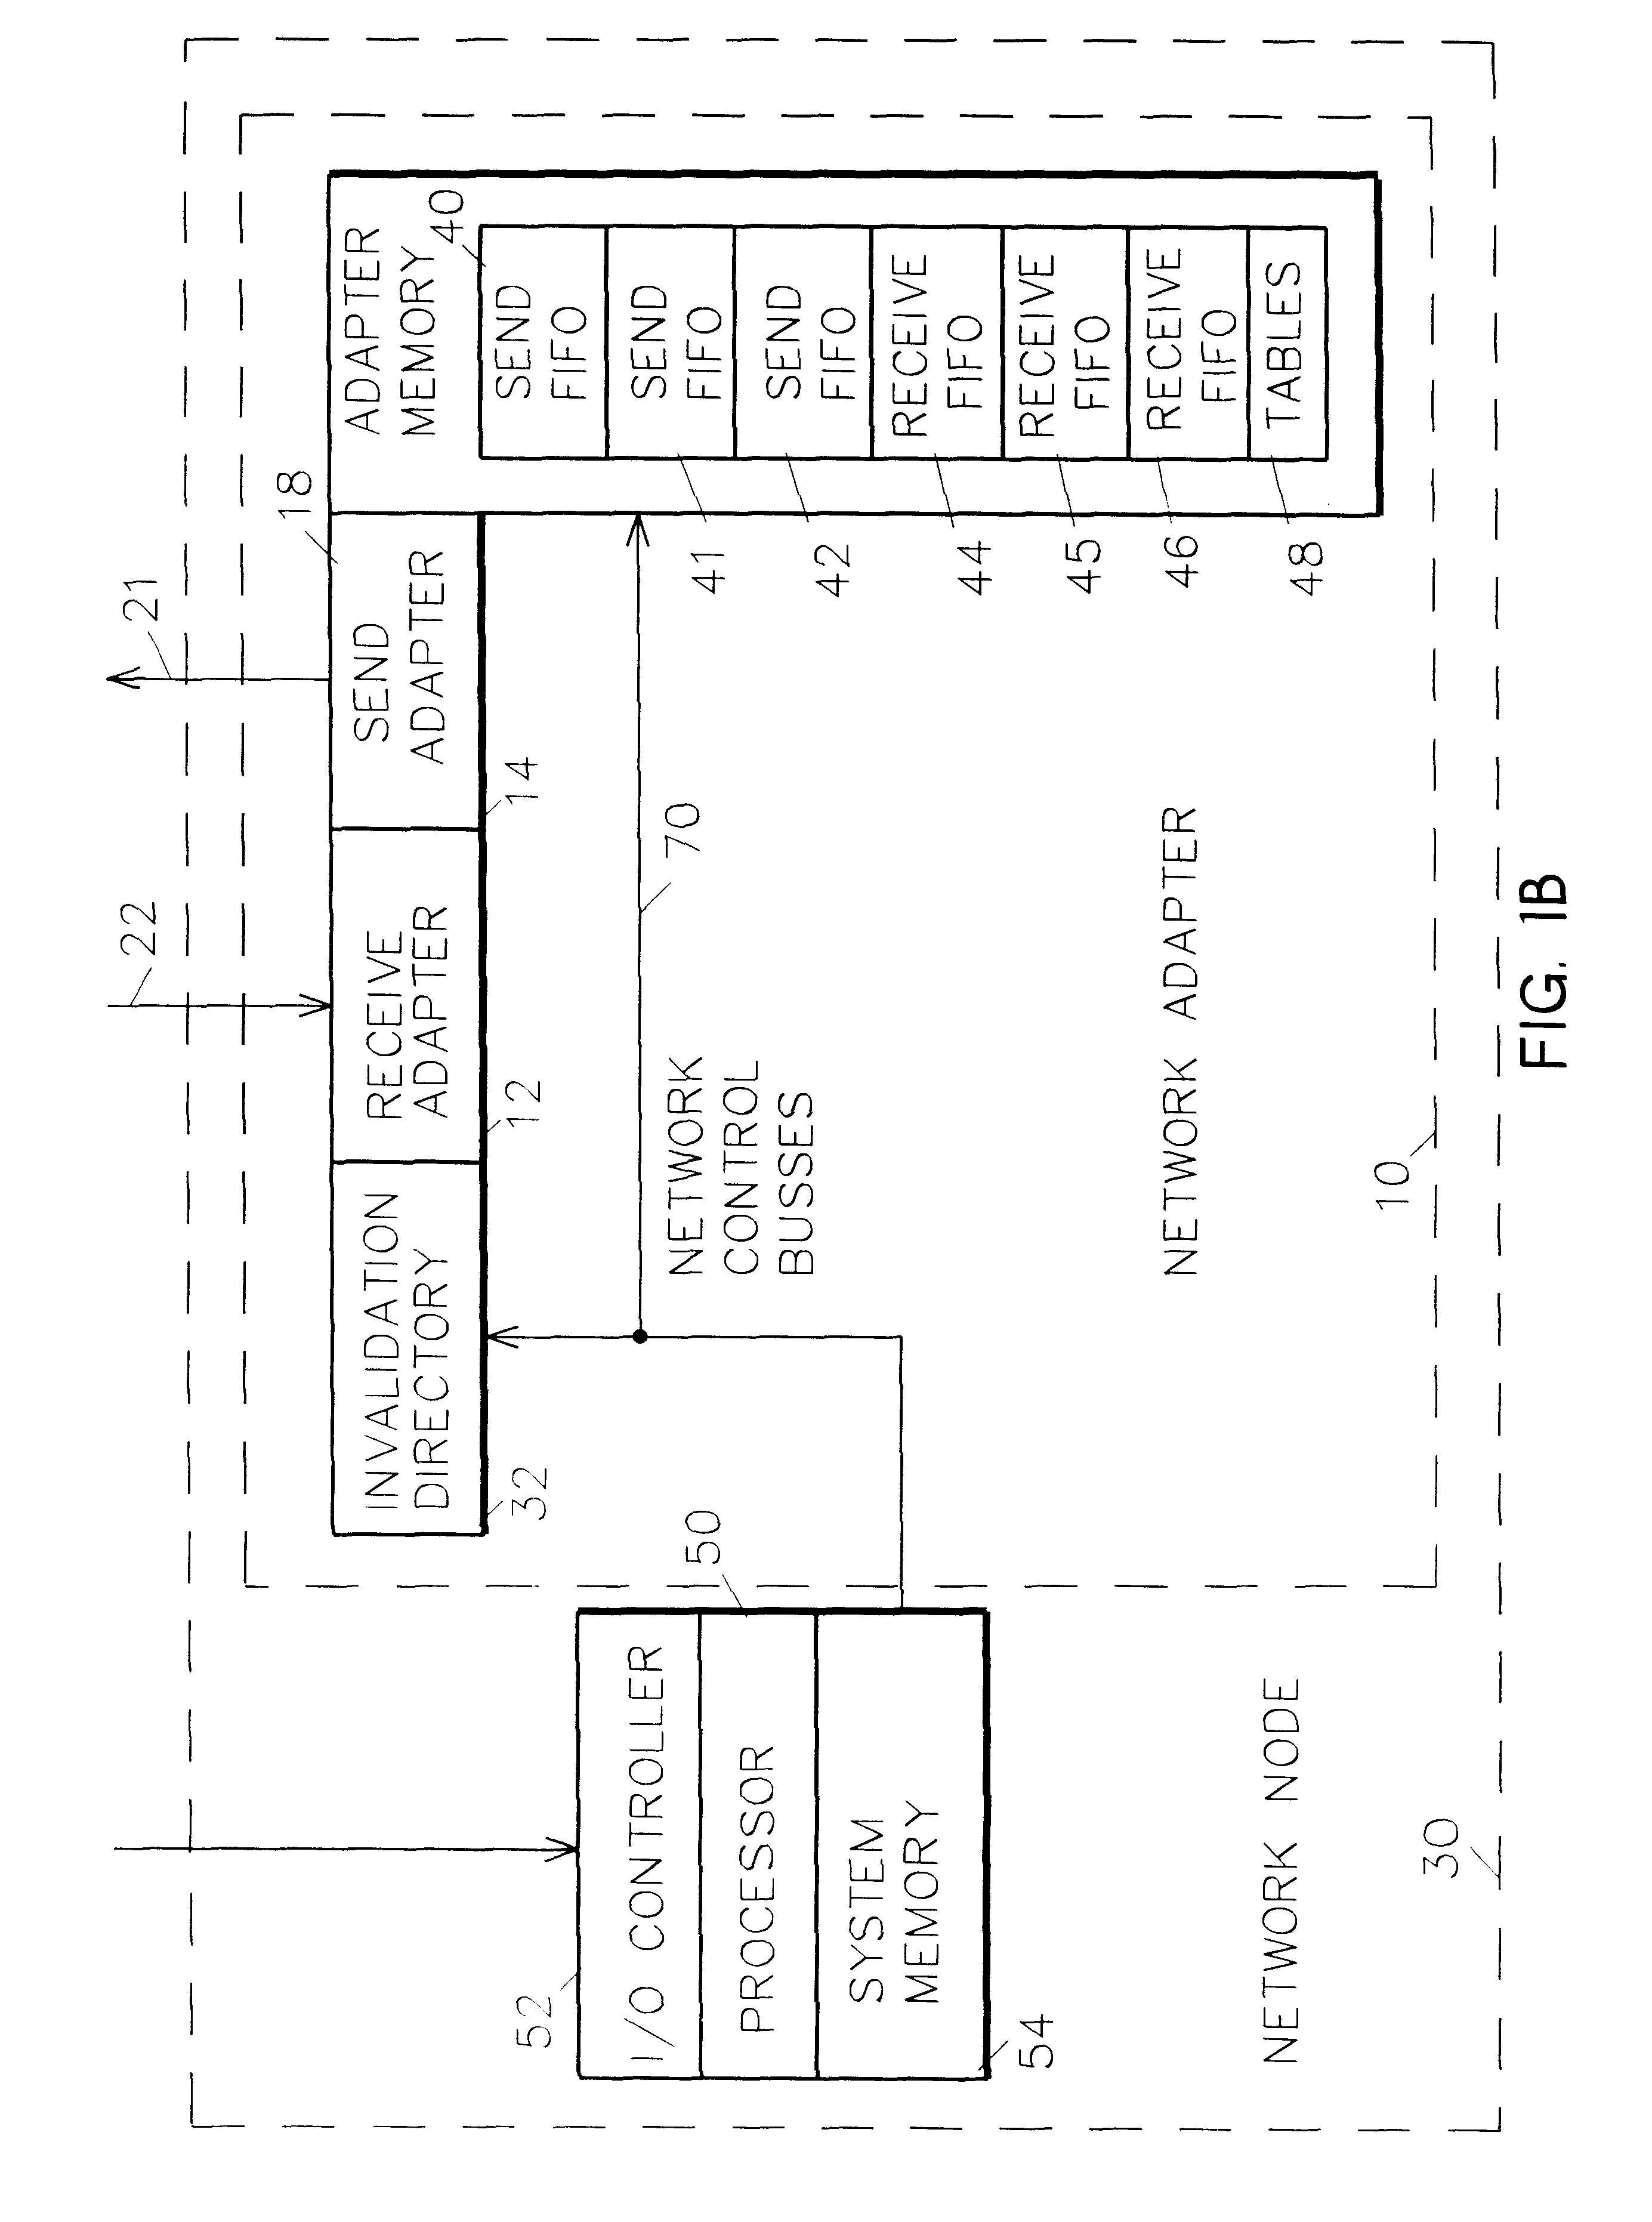 Cache coherent network adapter for scalable shared memory processing systems